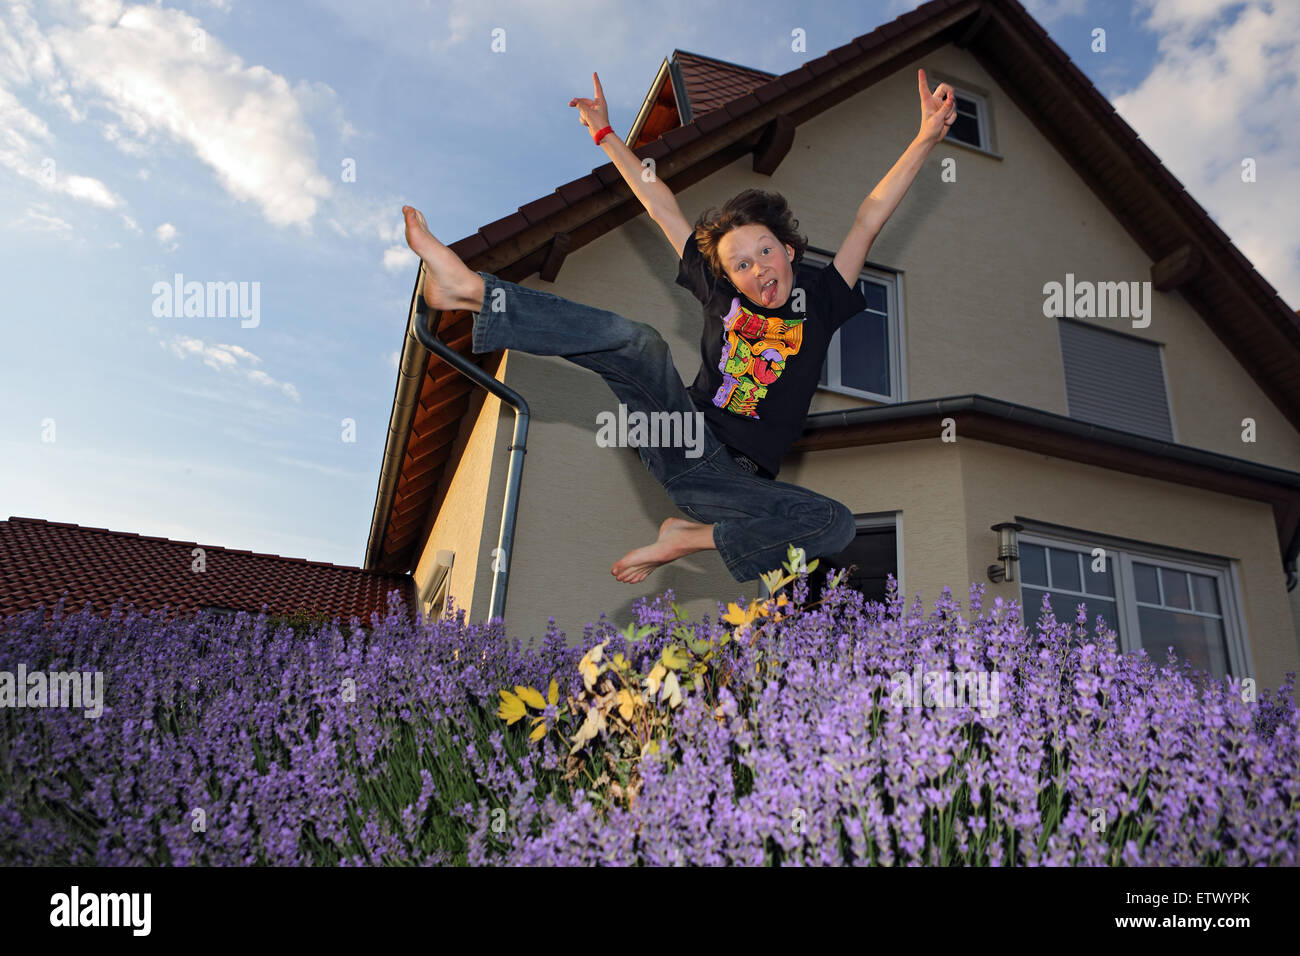 Werl, Germany, Young makes a leap into the air in front of a single-family house Stock Photo